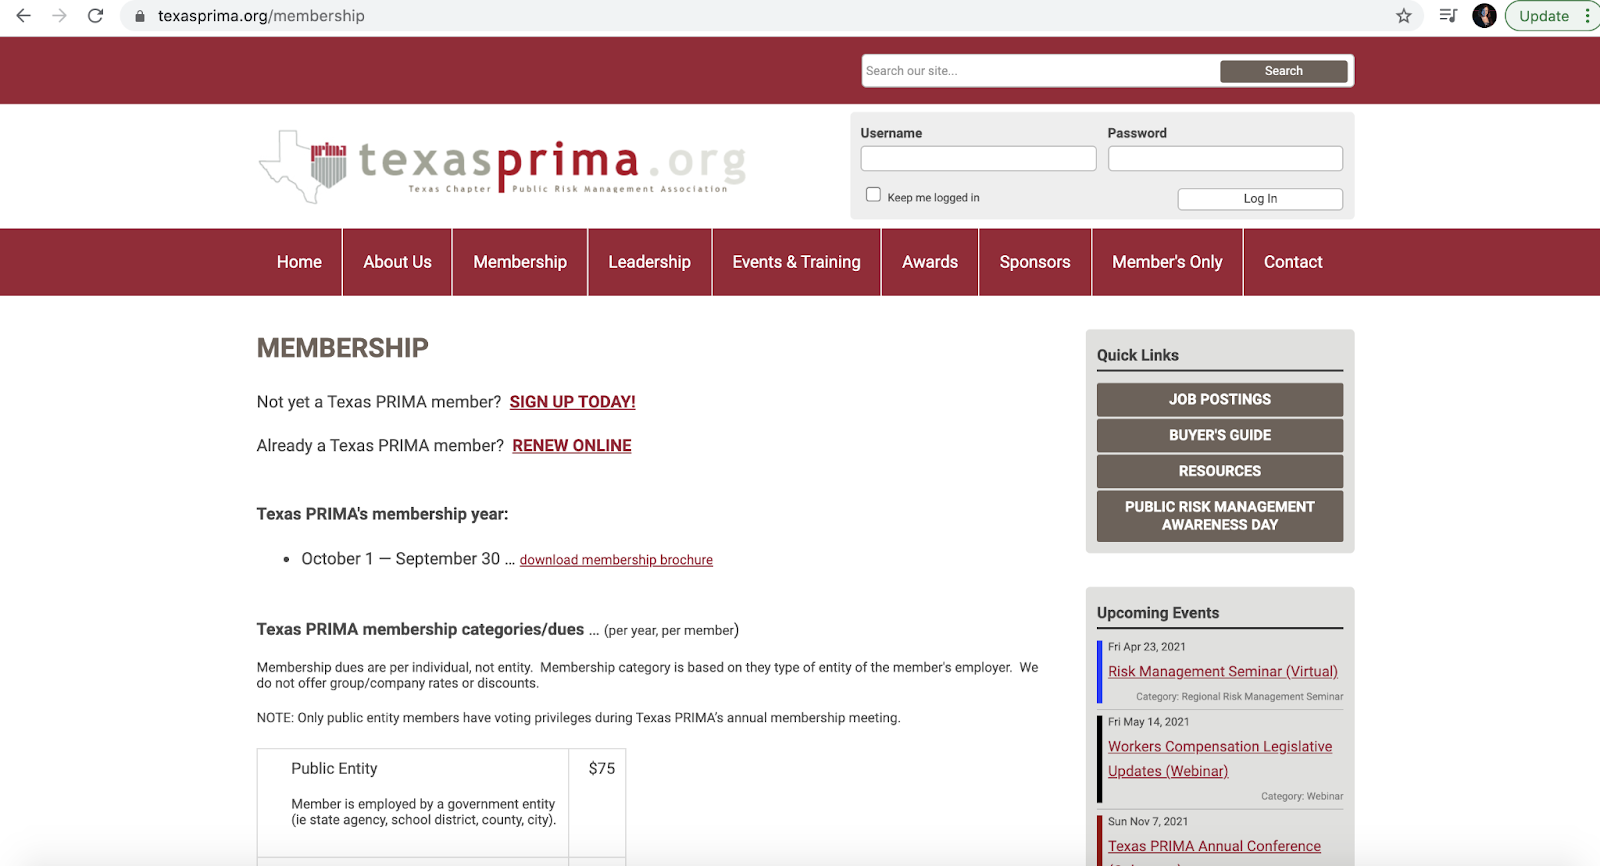  Texas PRIMA membership page  displaying easy links to their member's only sections as well as membership information section in the top navigation of the site.